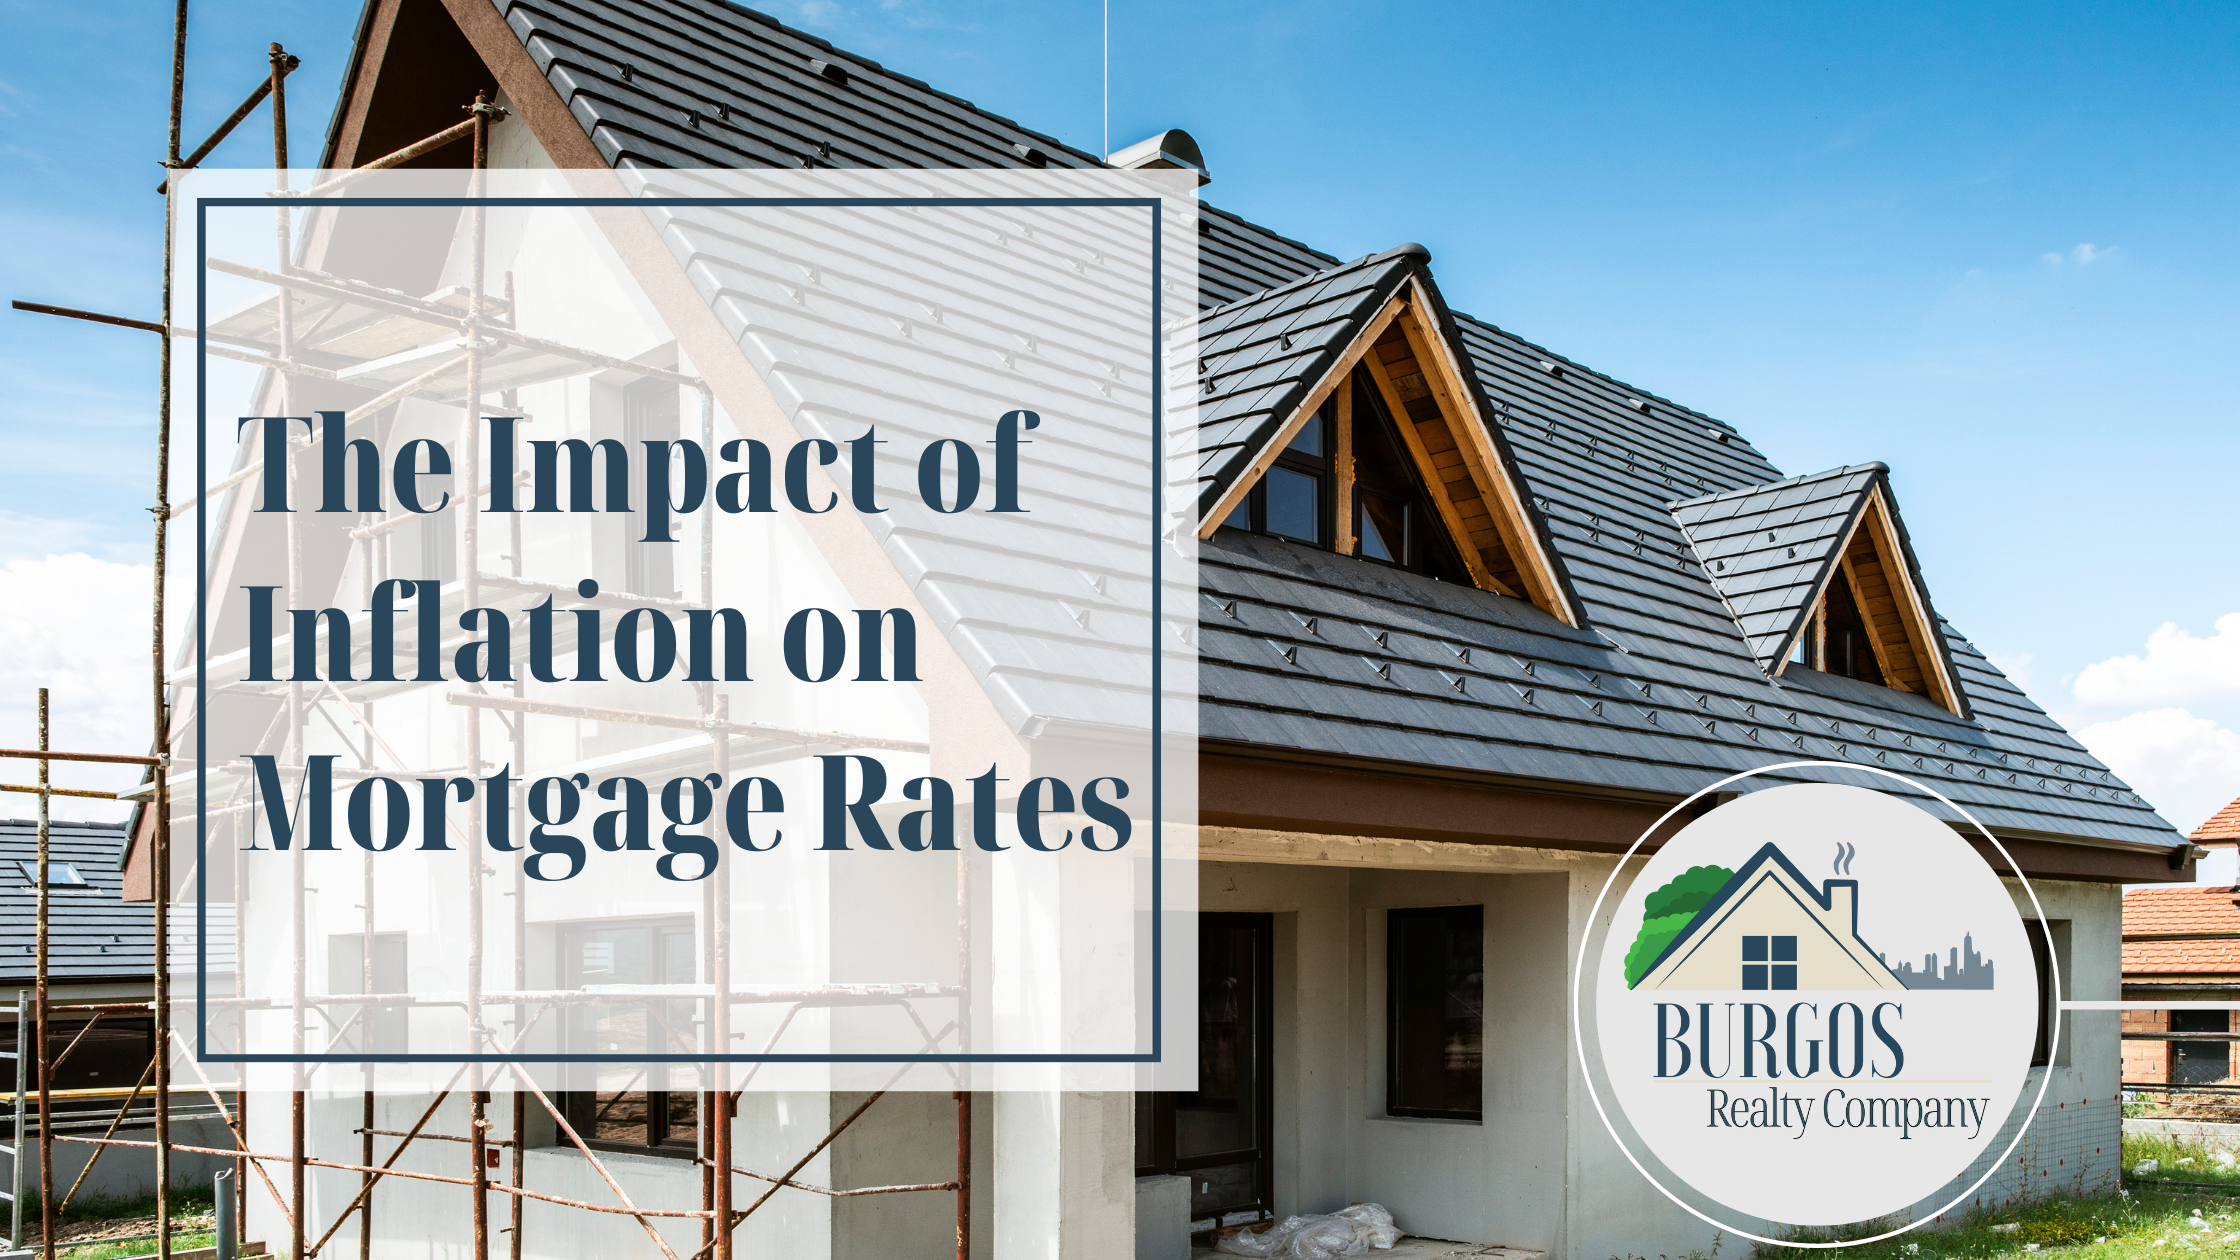 Blog about the impact of inflation on mortgage rates Burgos Realty Company